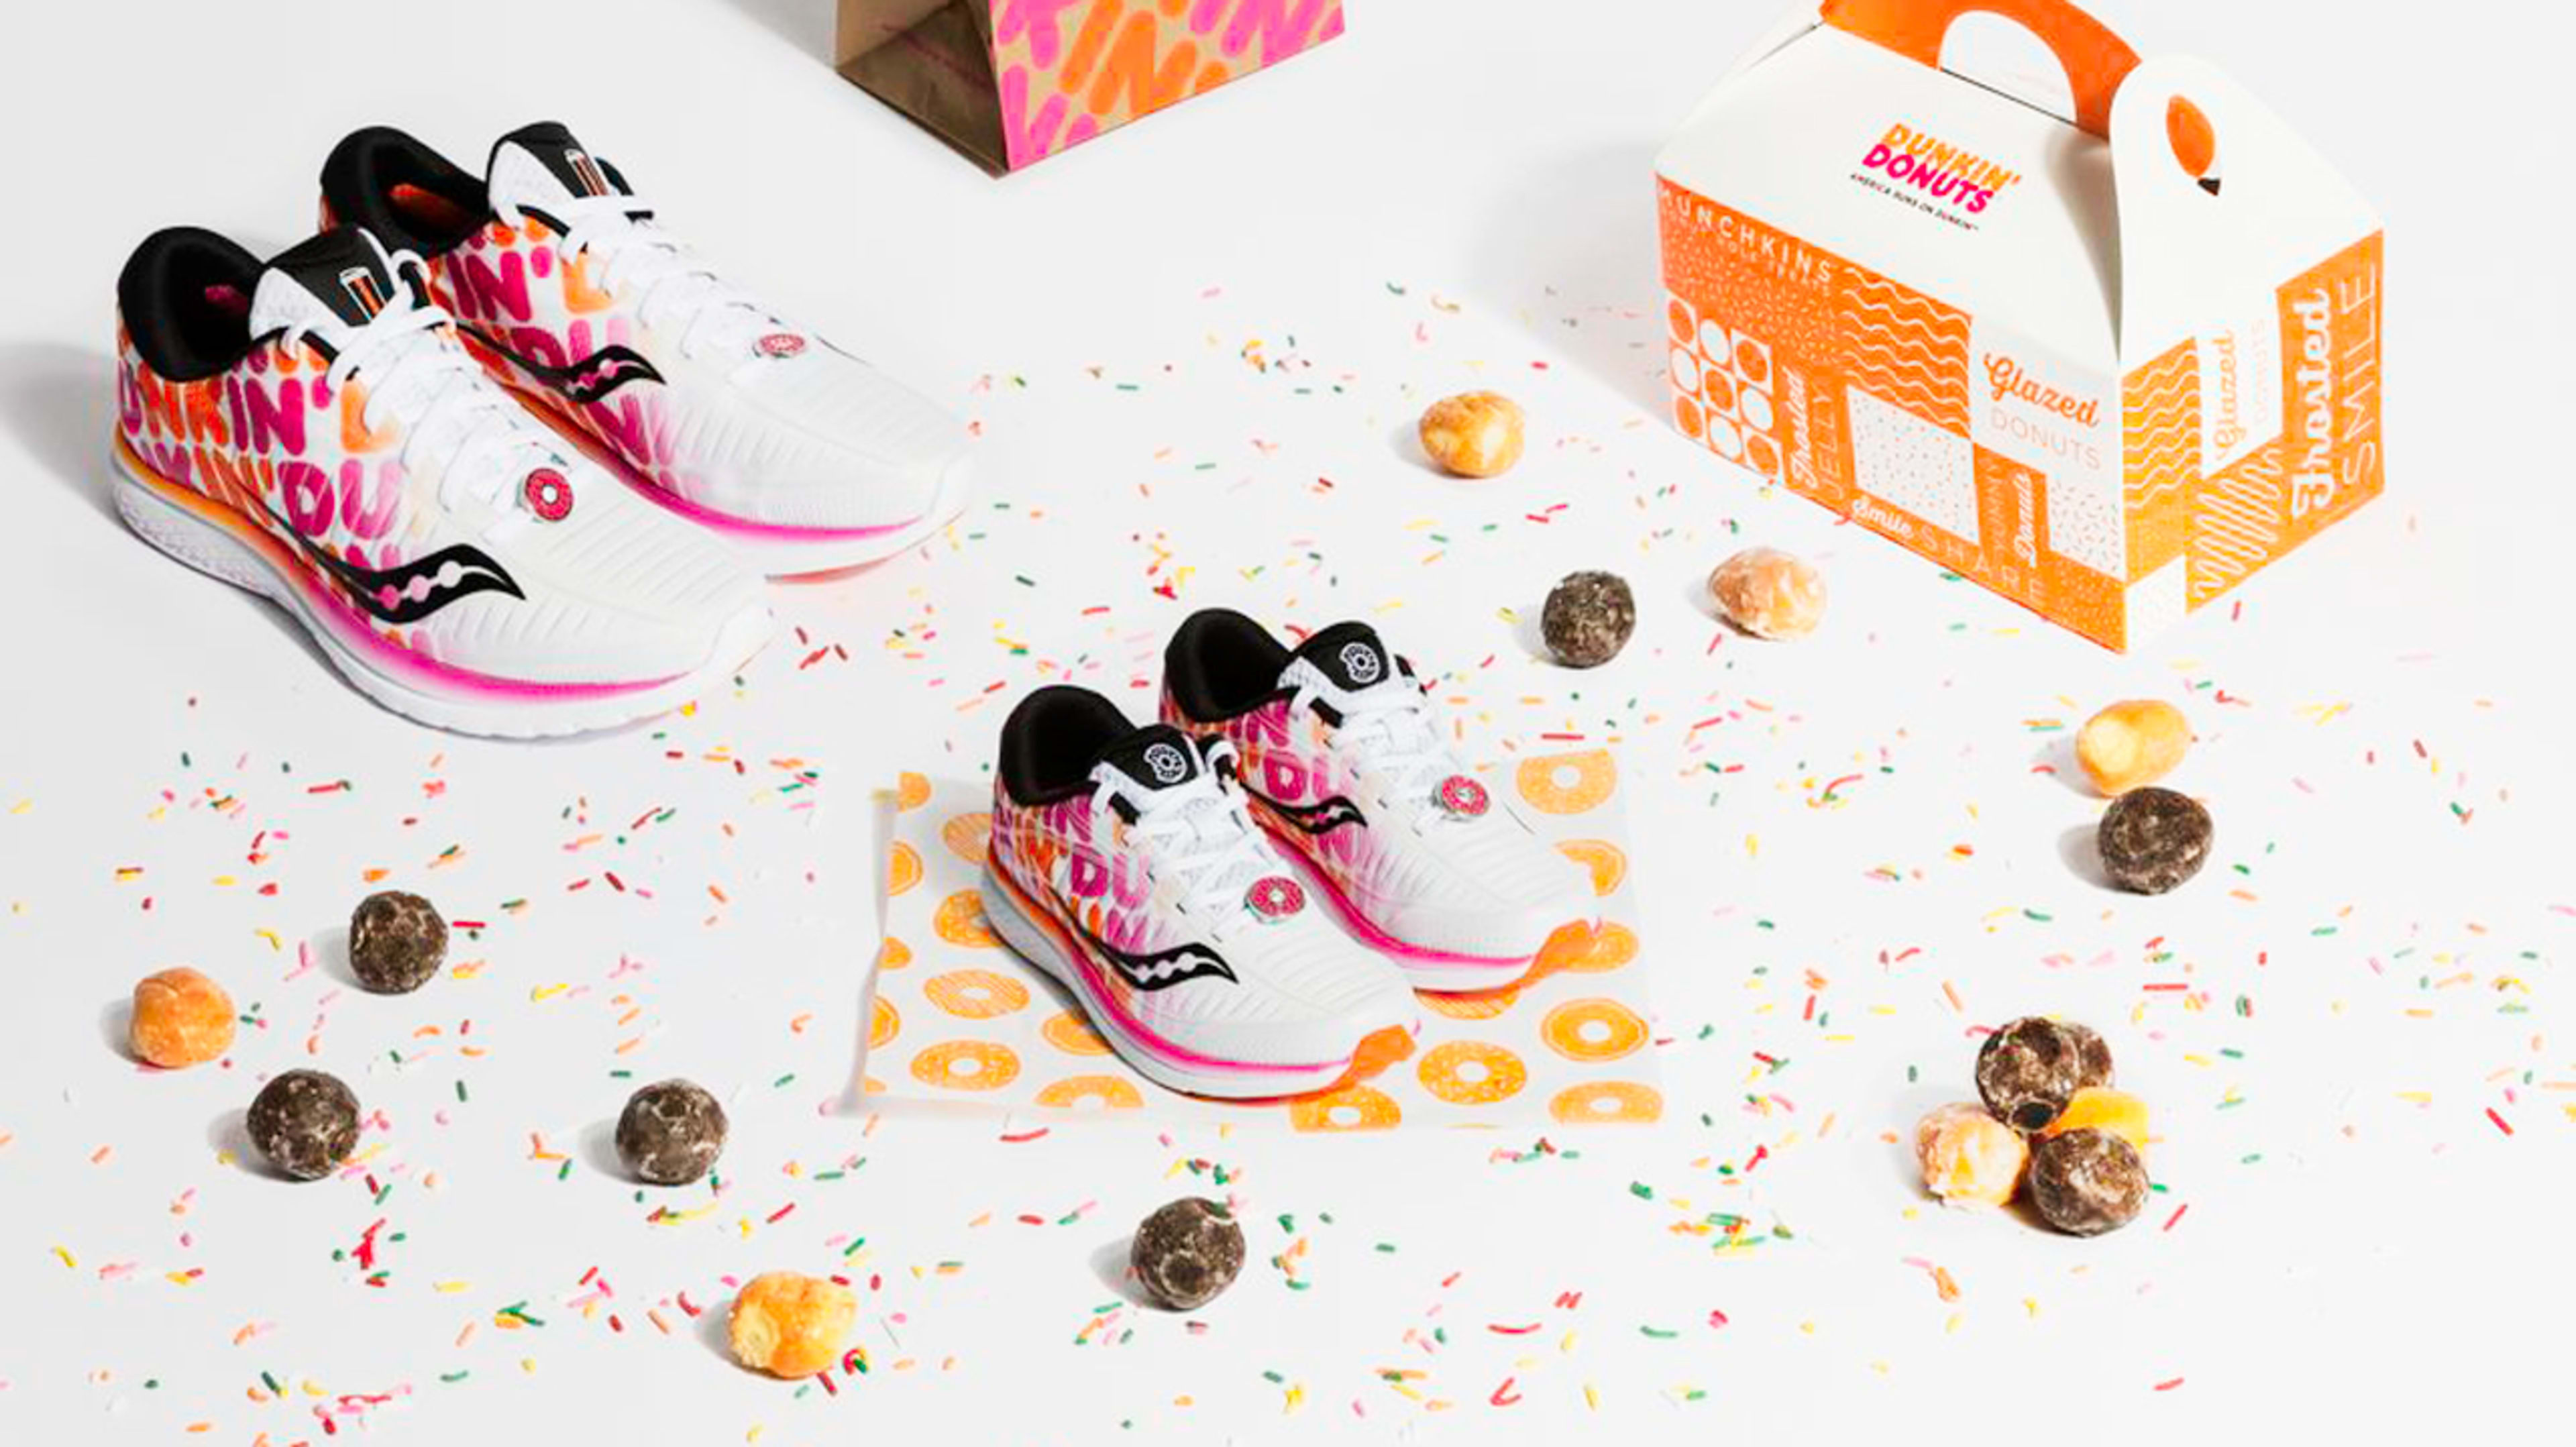 These Dunkin’ donut-inspired Saucony sneakers might be the best-ever fast food-footwear collaboration